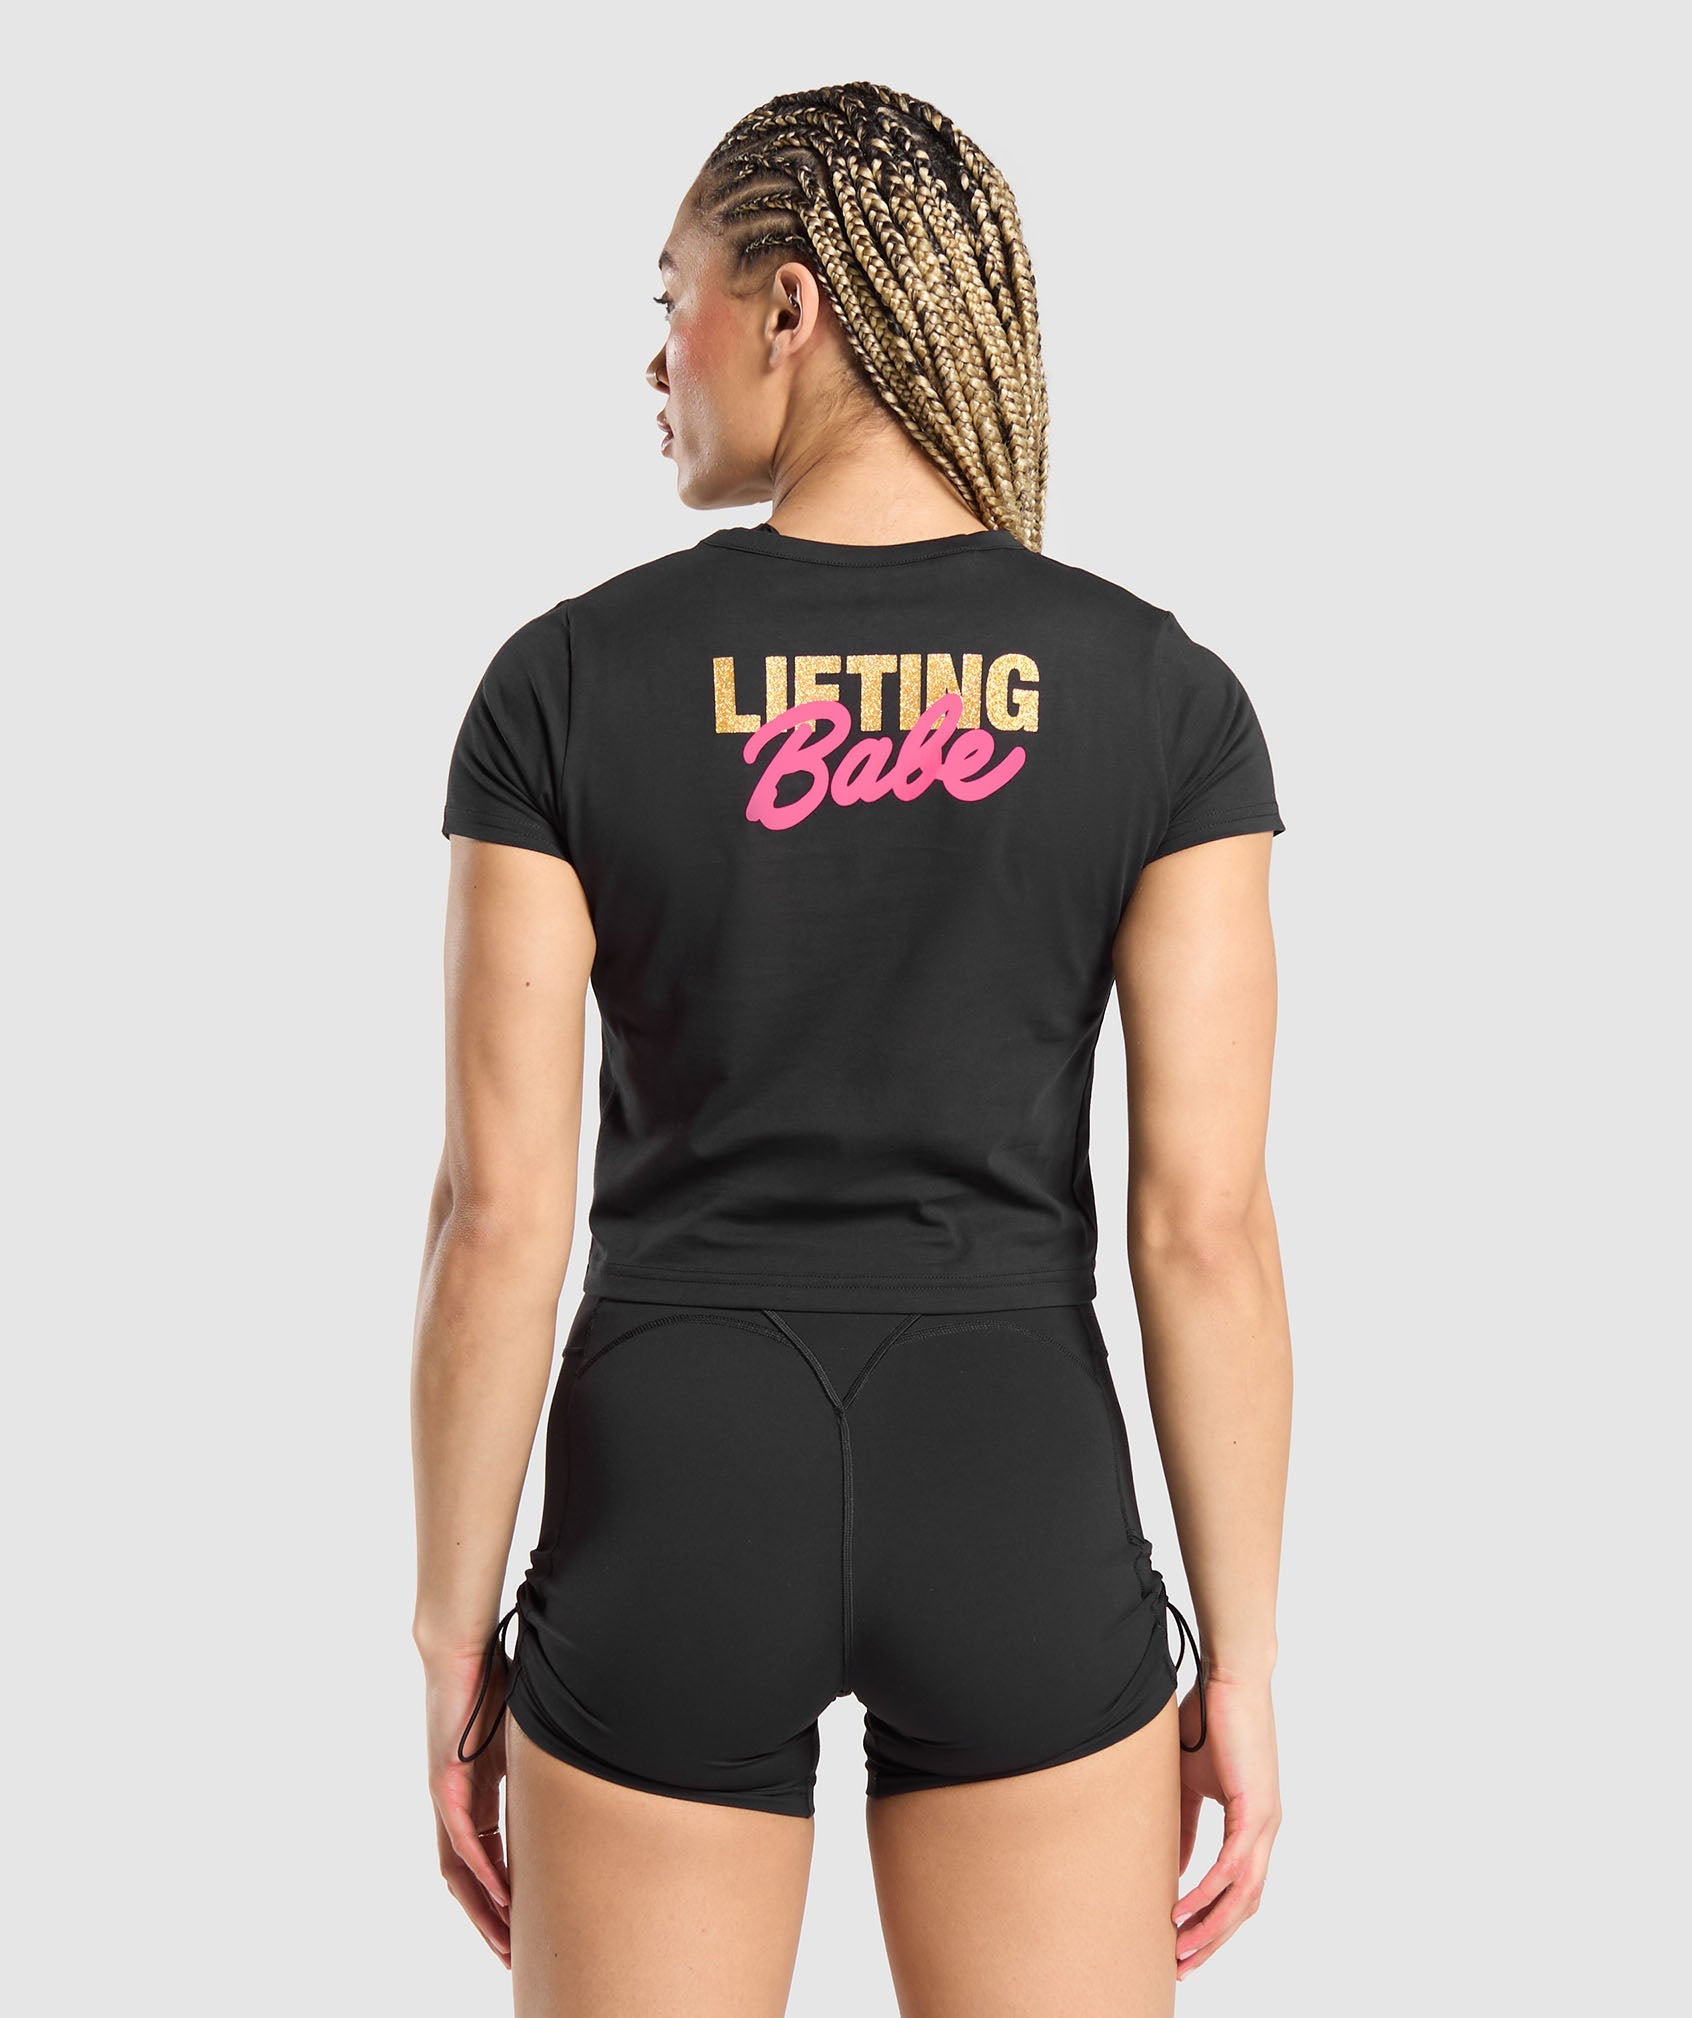 Lifting Babe Tee in Black - view 1